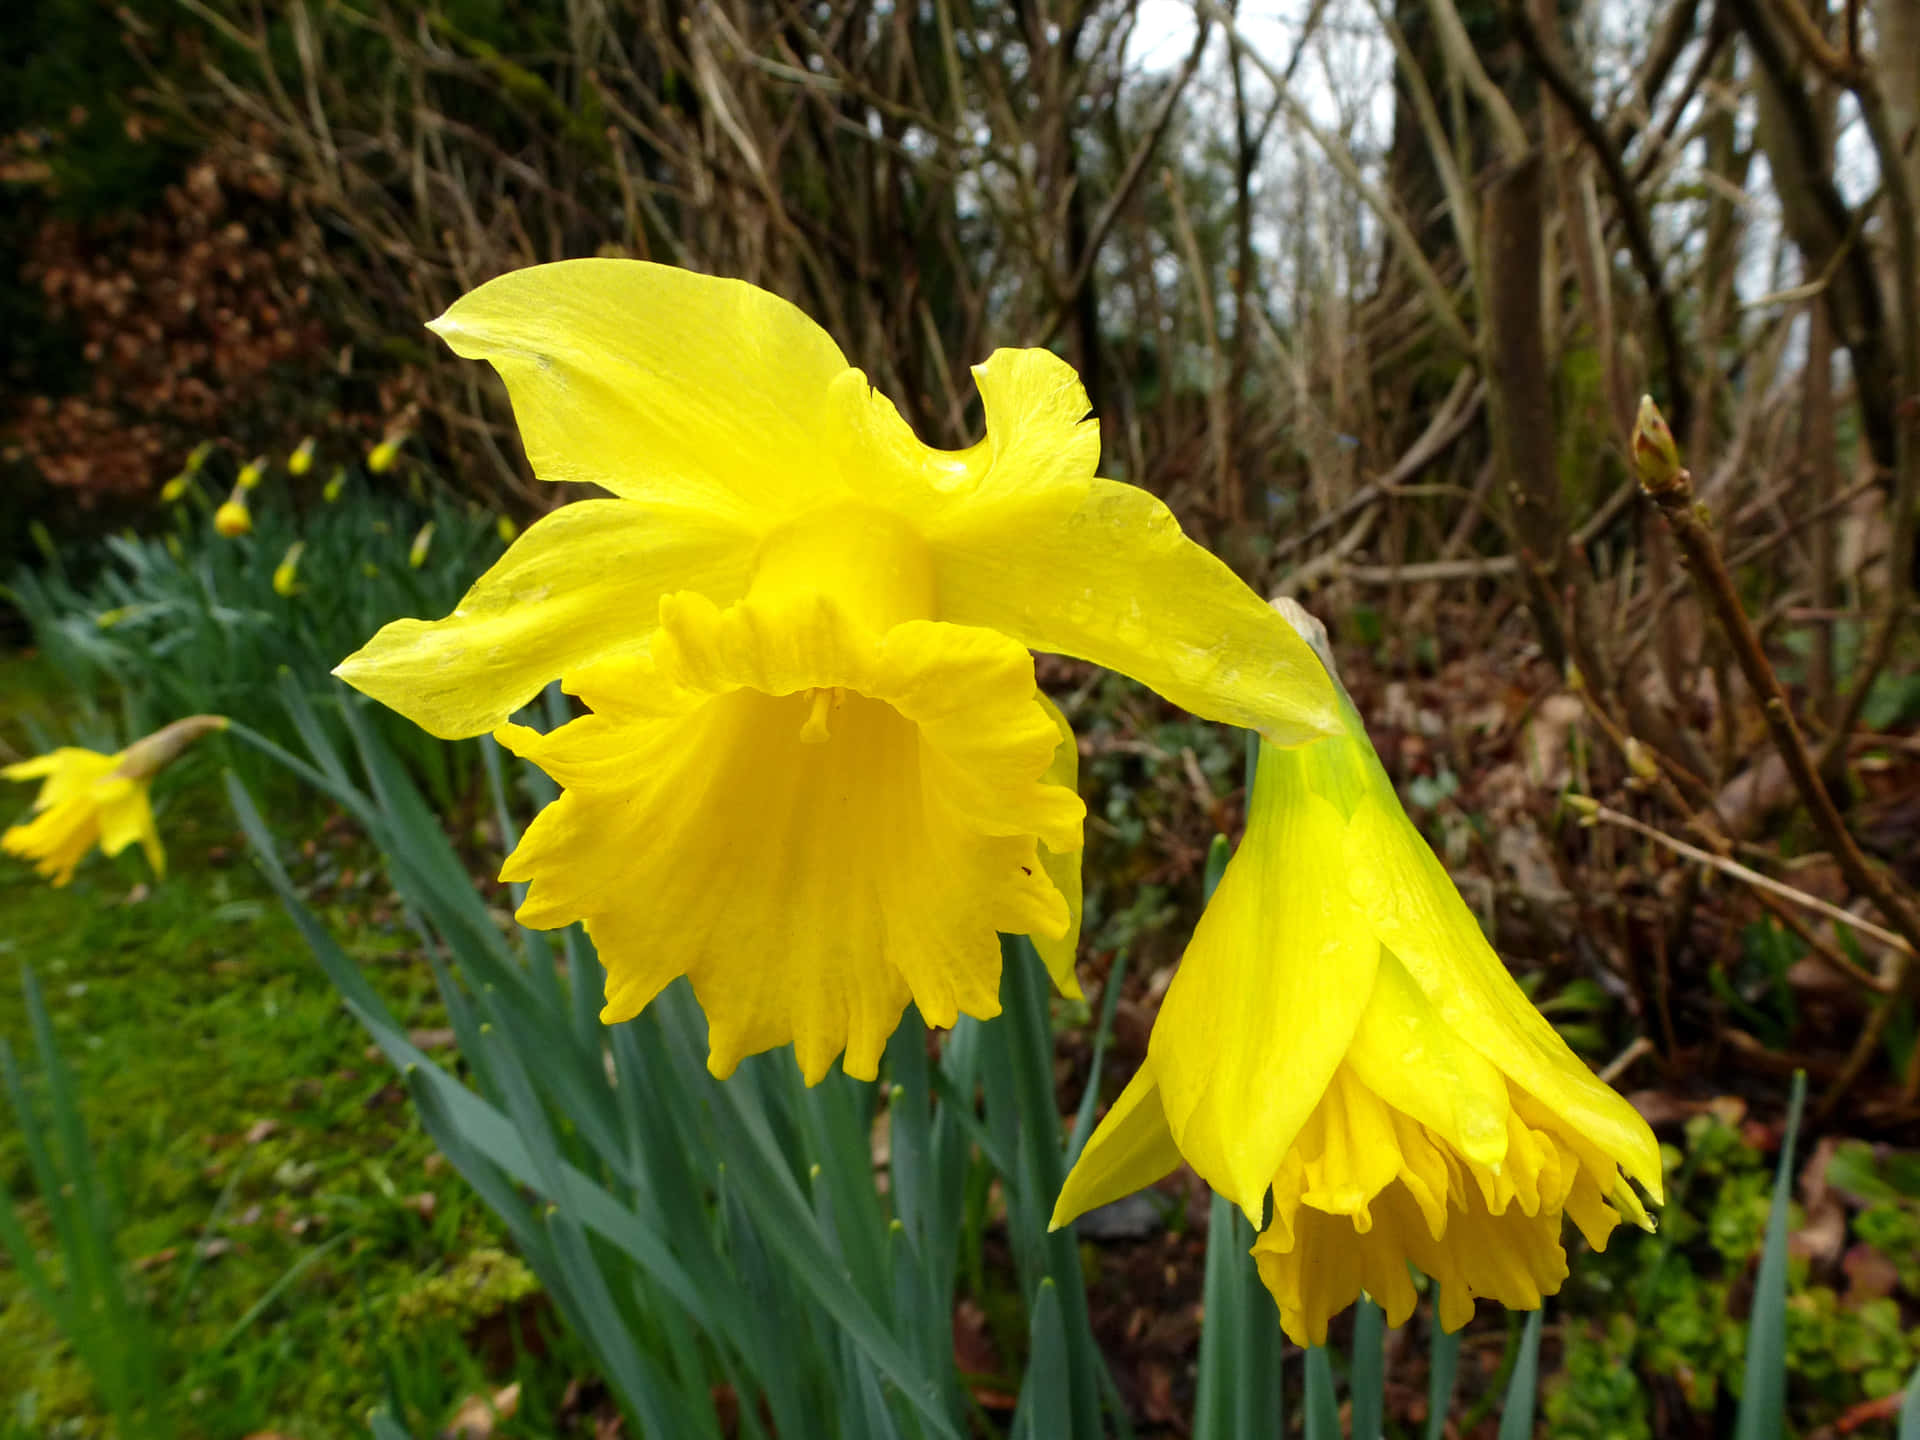 Blooming daffodils in a field of sunshine